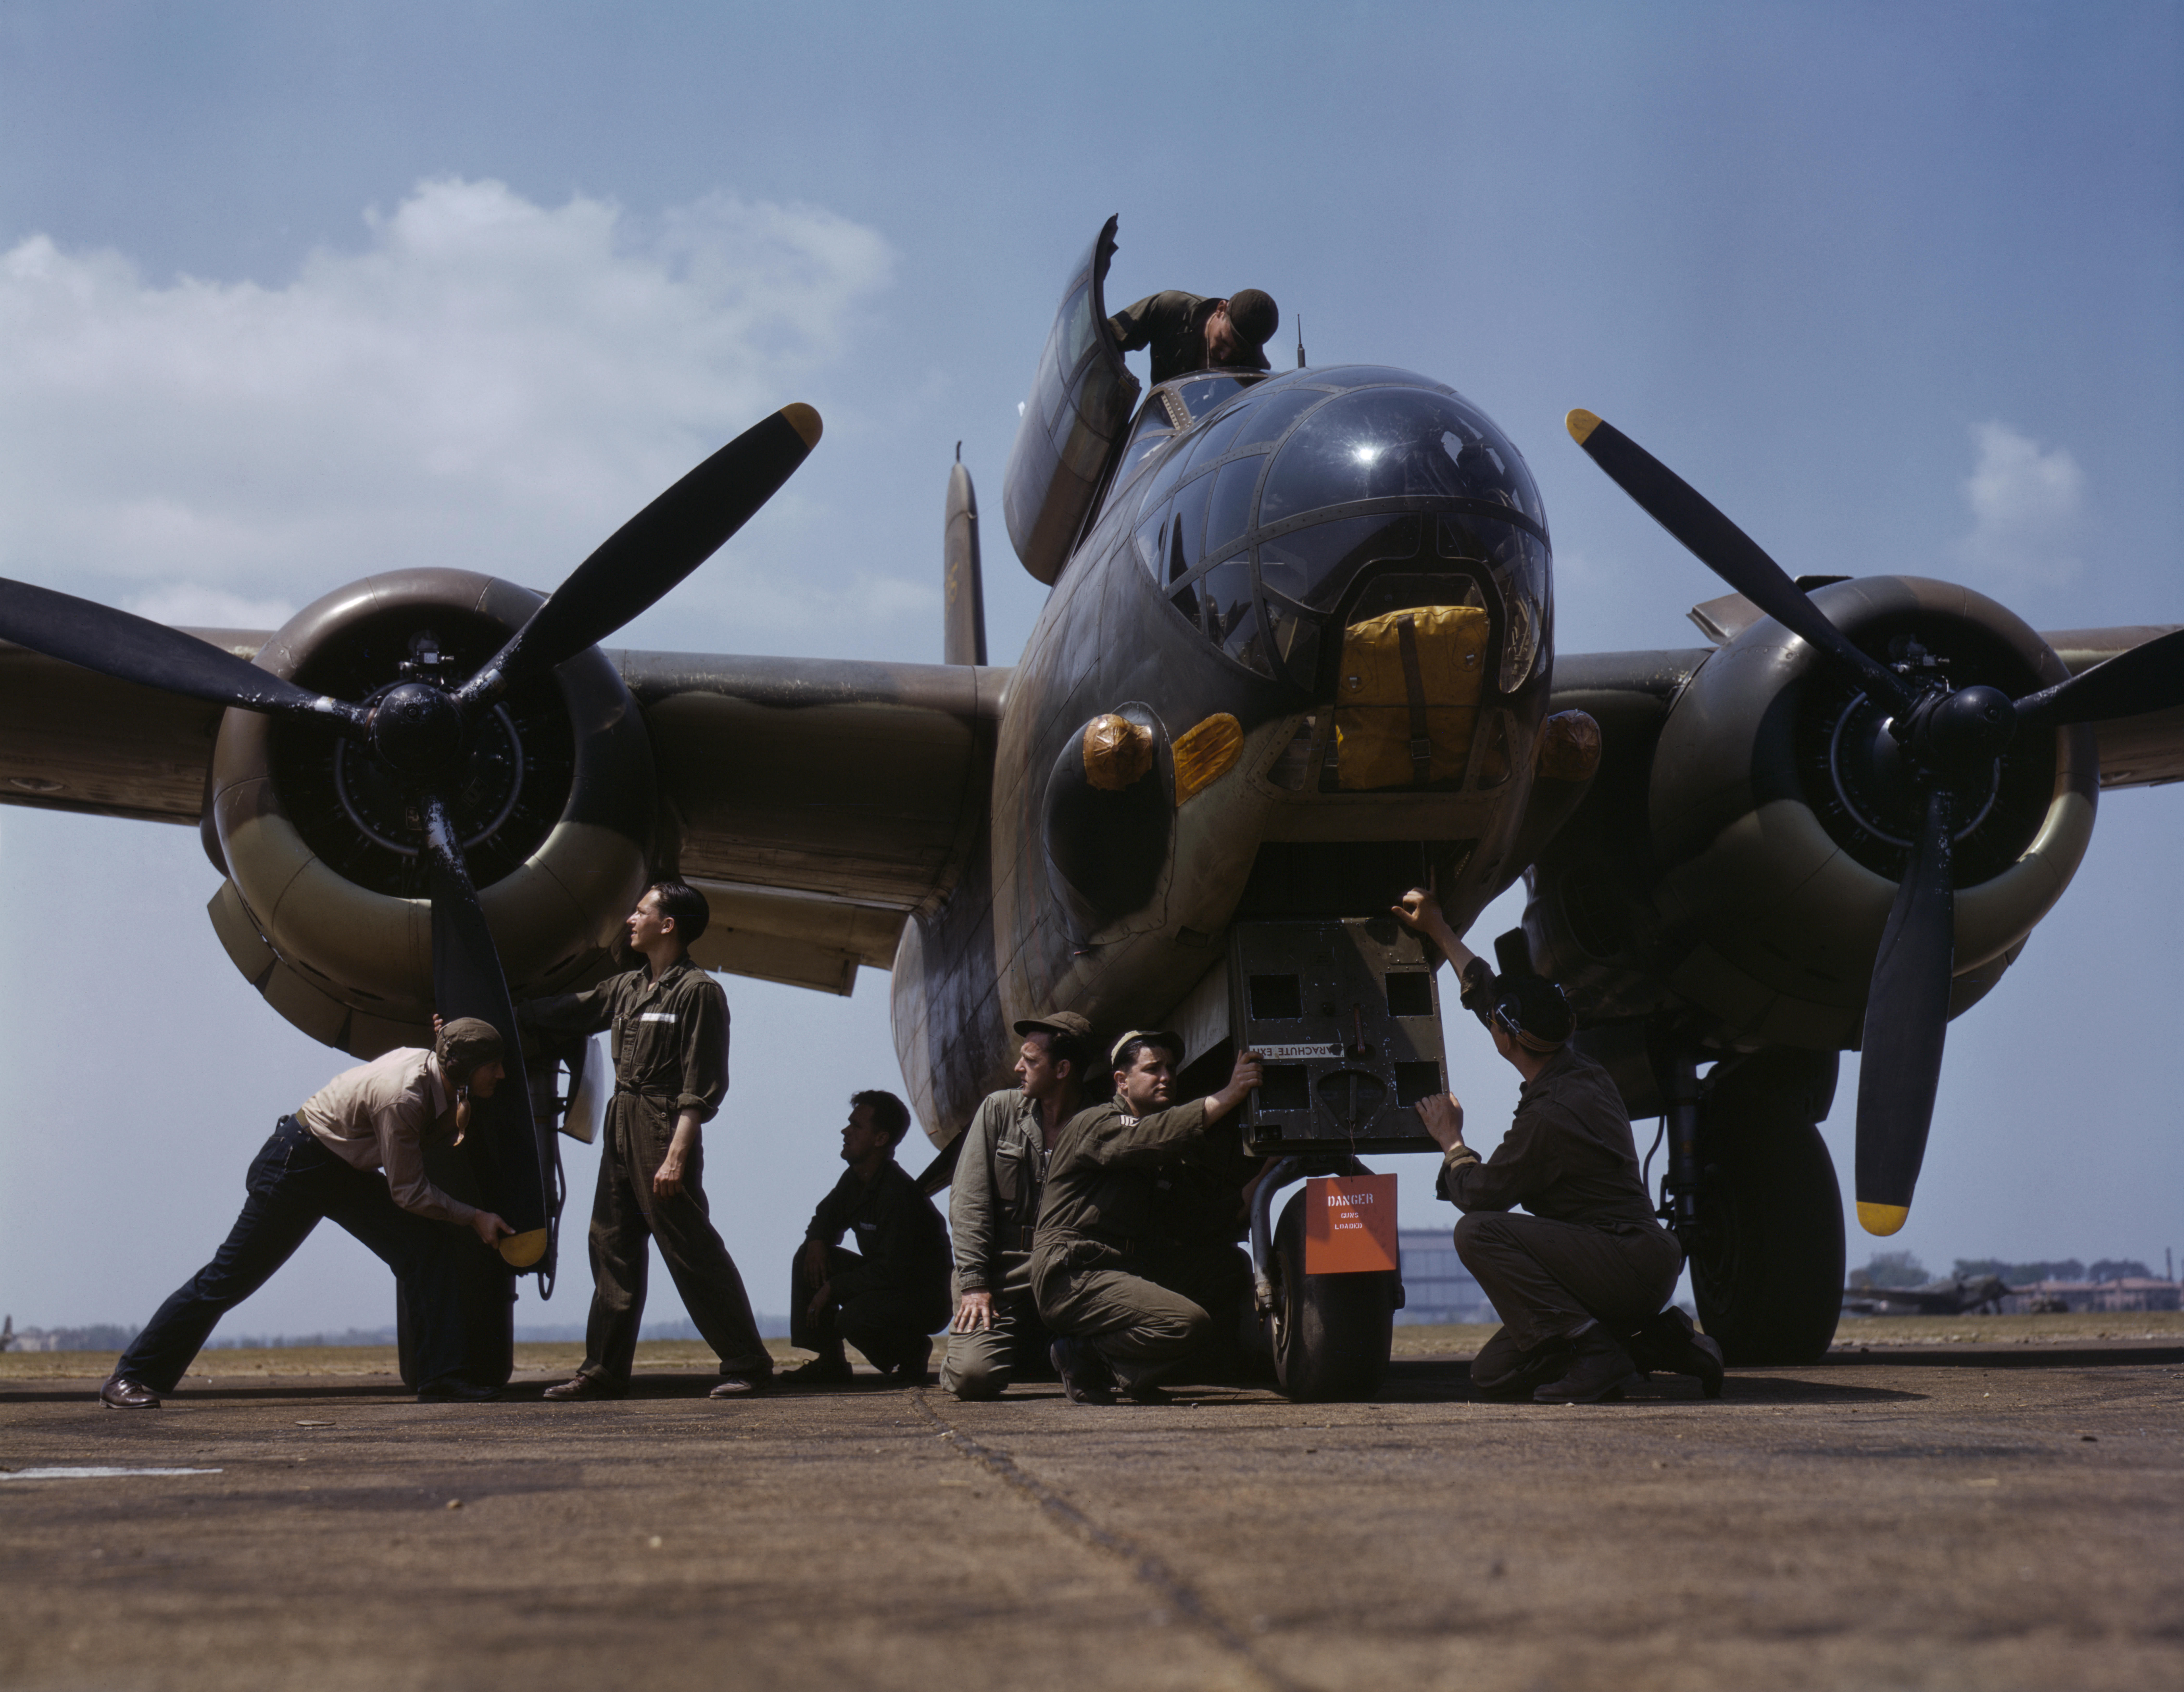 American crew servicing an A-20 Havoc bomber, Langley Field, Virginia, United States, Jul 1942